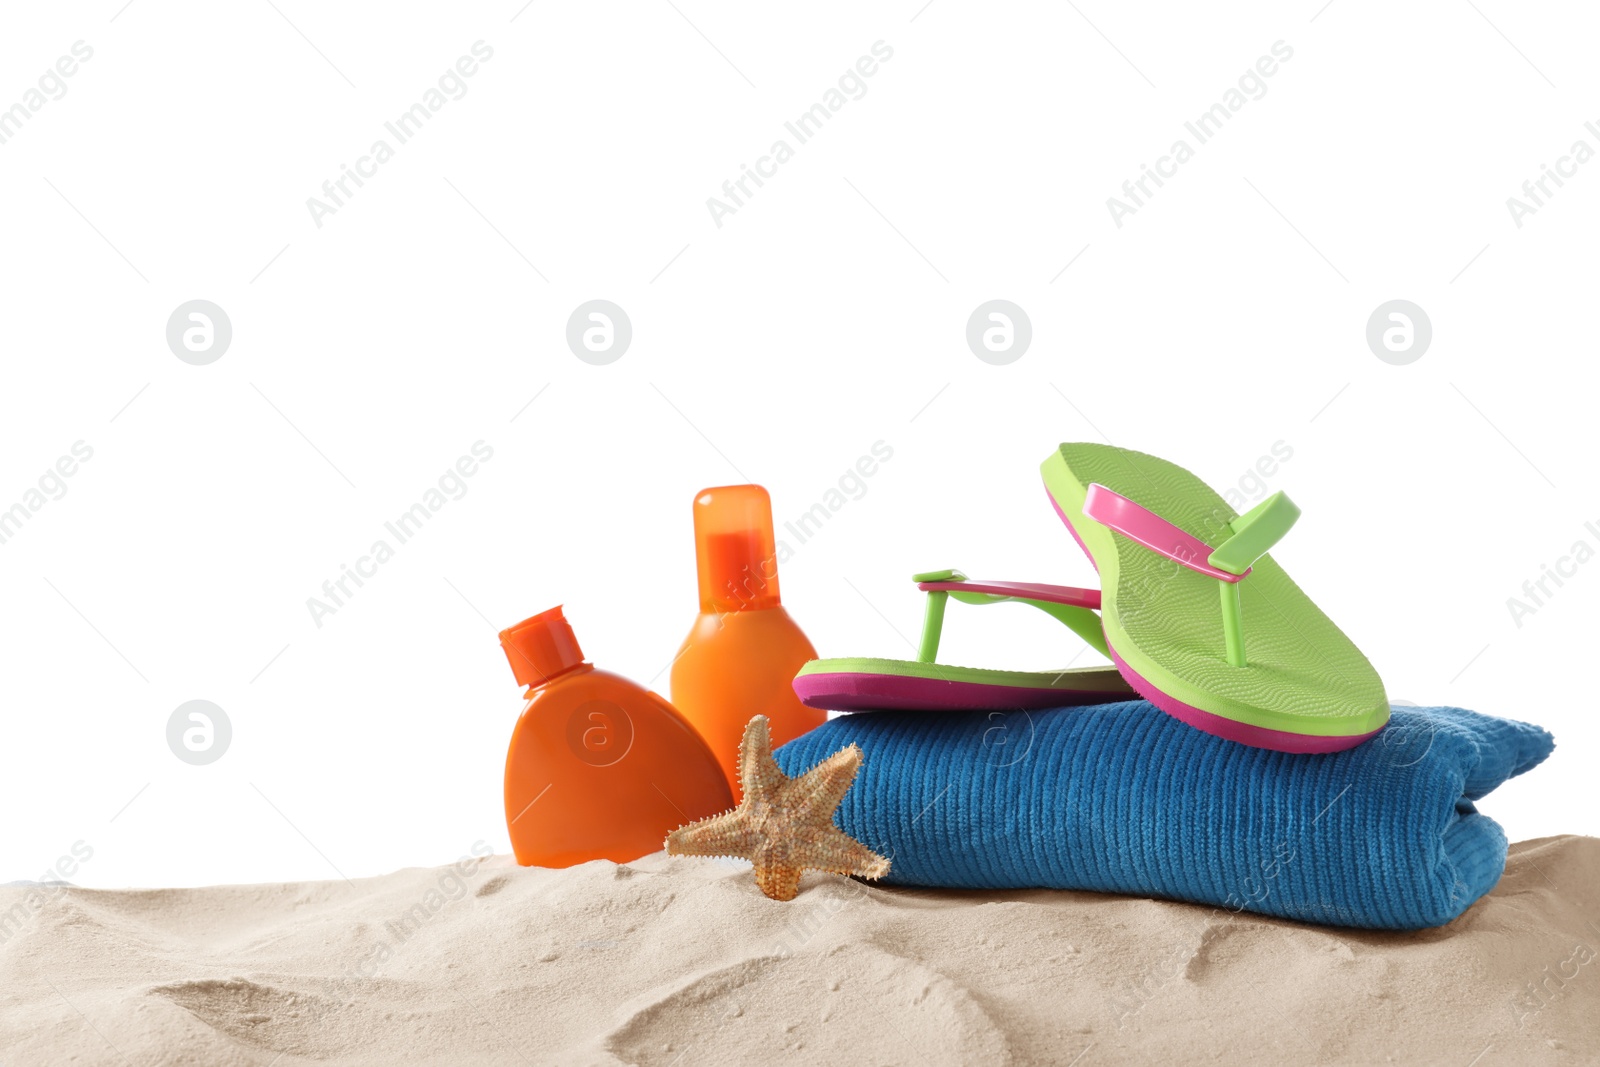 Photo of Composition with beach objects on sand against white background